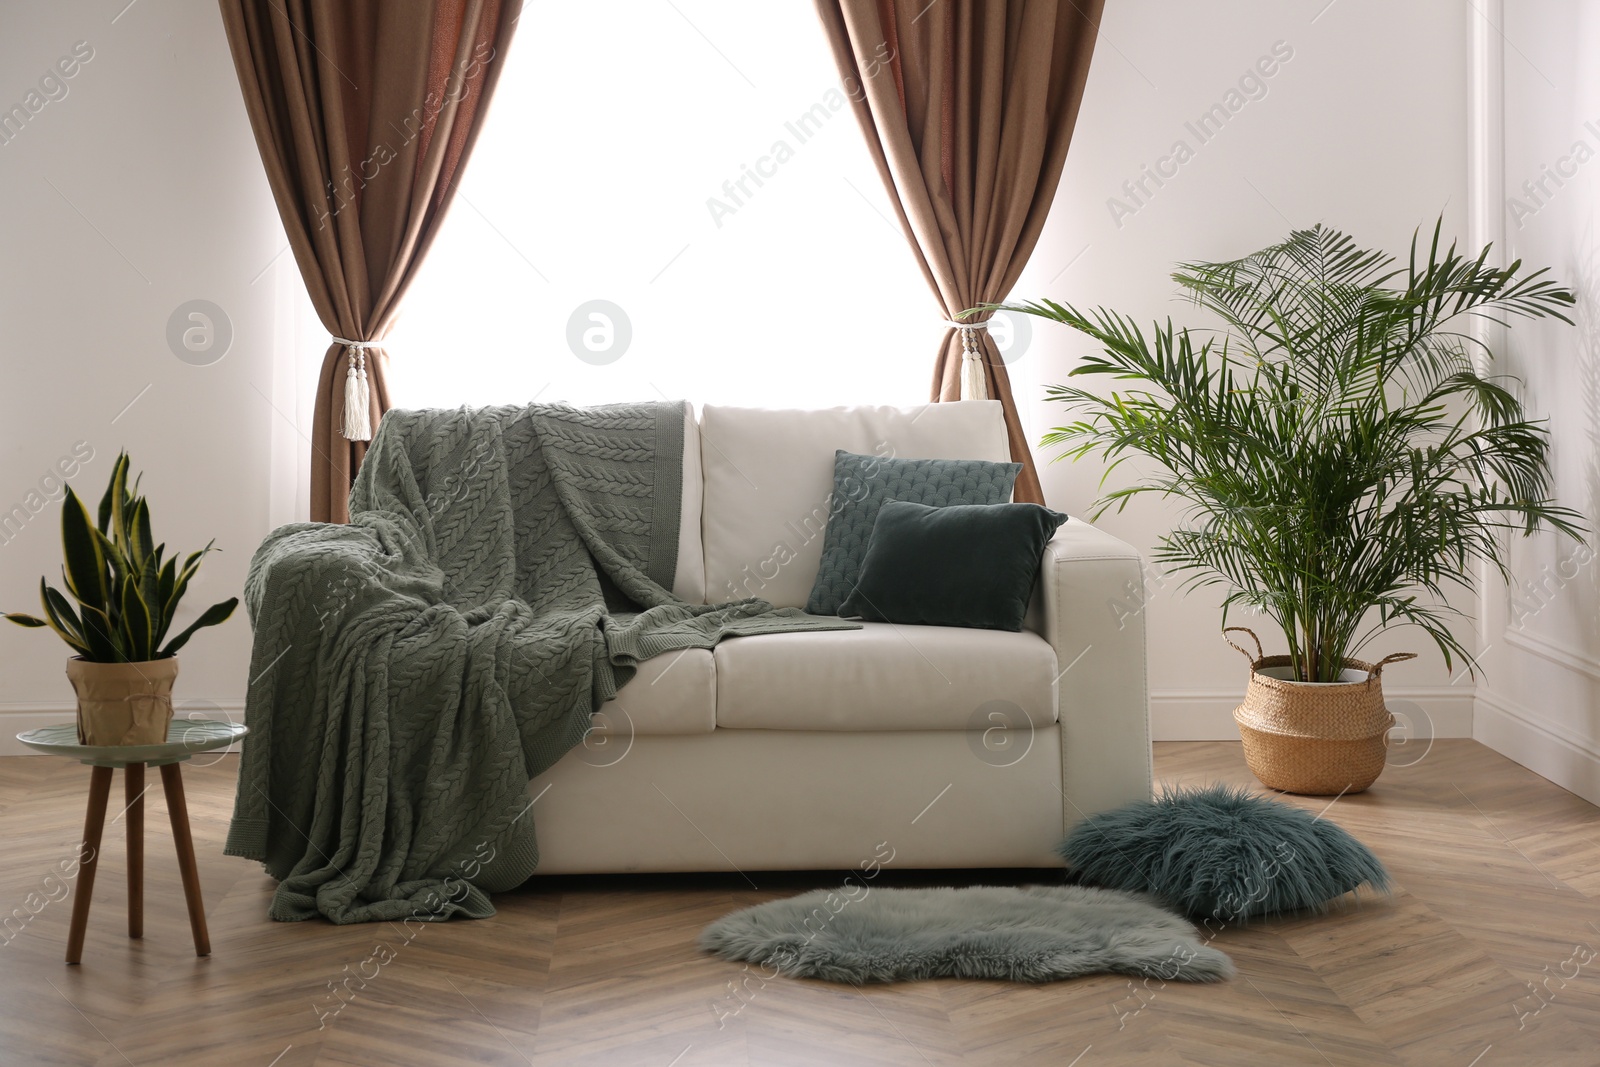 Photo of Comfortable sofa near window with stylish curtains in living room. Interior design